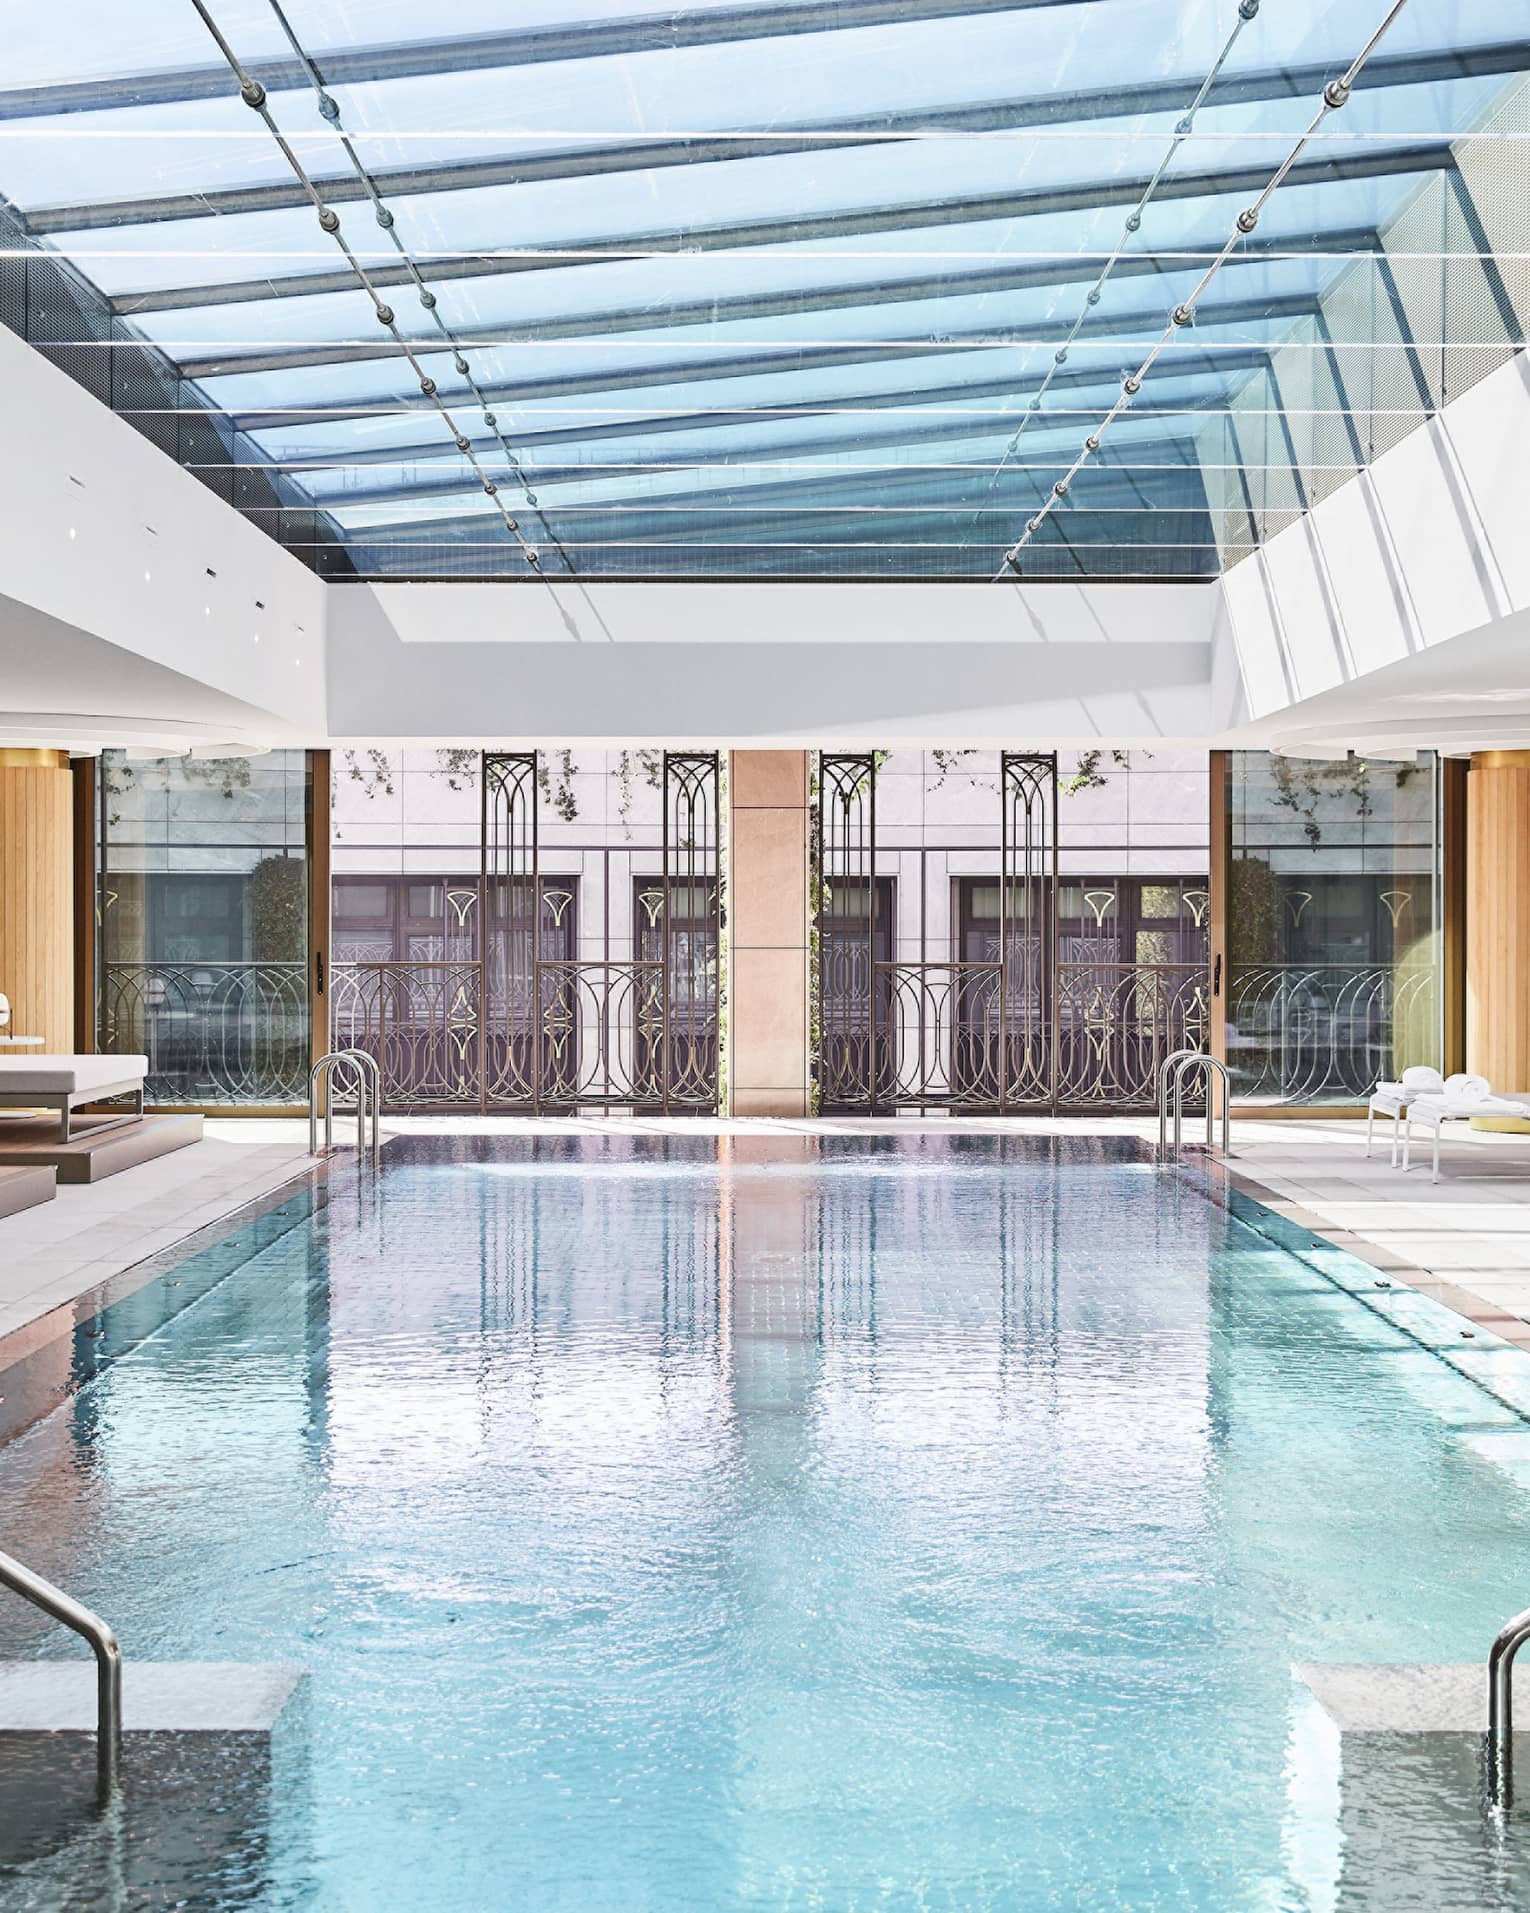 Rectangular indoor pool with two staircases into the pool, glass window ceiling